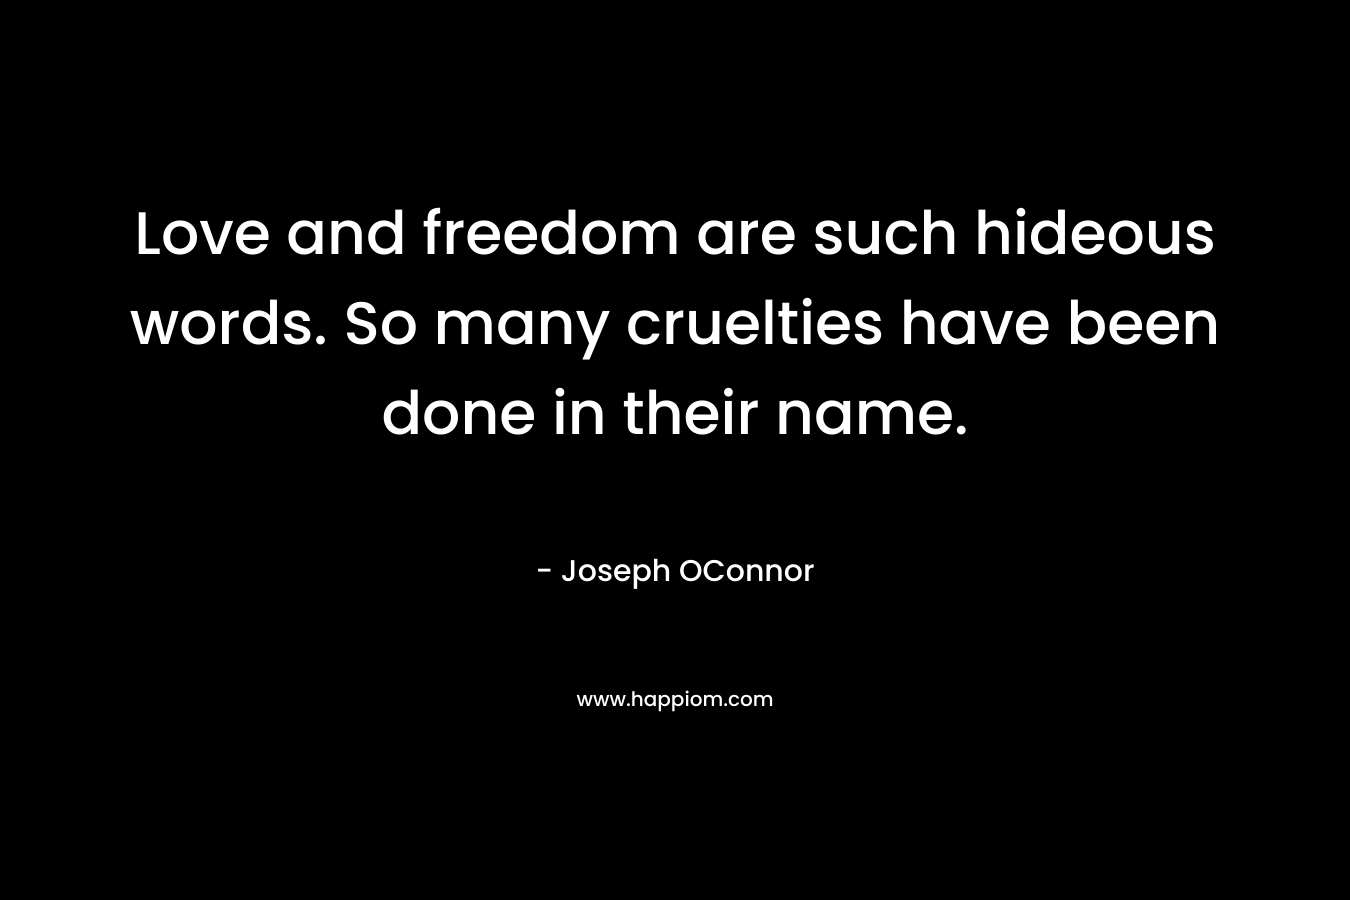 Love and freedom are such hideous words. So many cruelties have been done in their name.